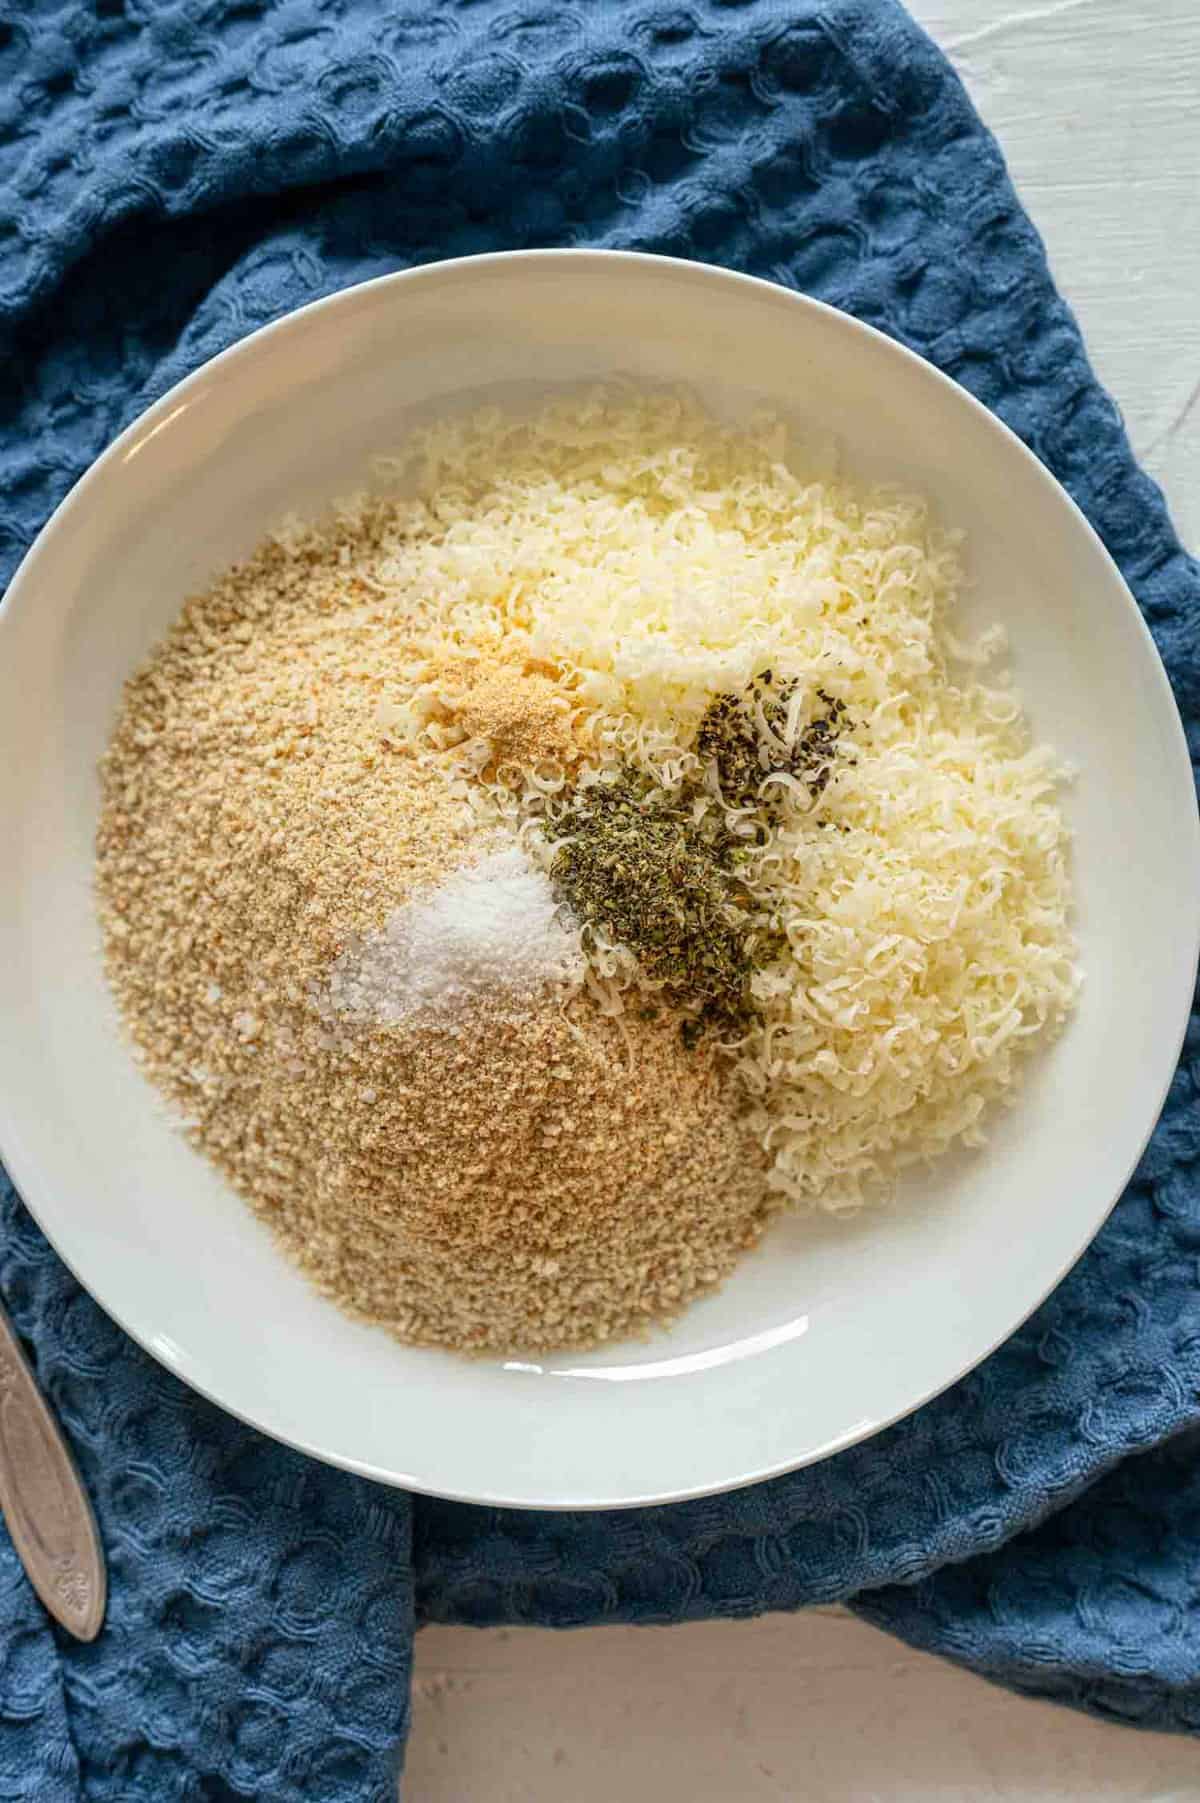 Bread Crumbs, seasonings, and grated parmesan cheese in bowl for breading chicken breasts for Baked Parmesan Chicken